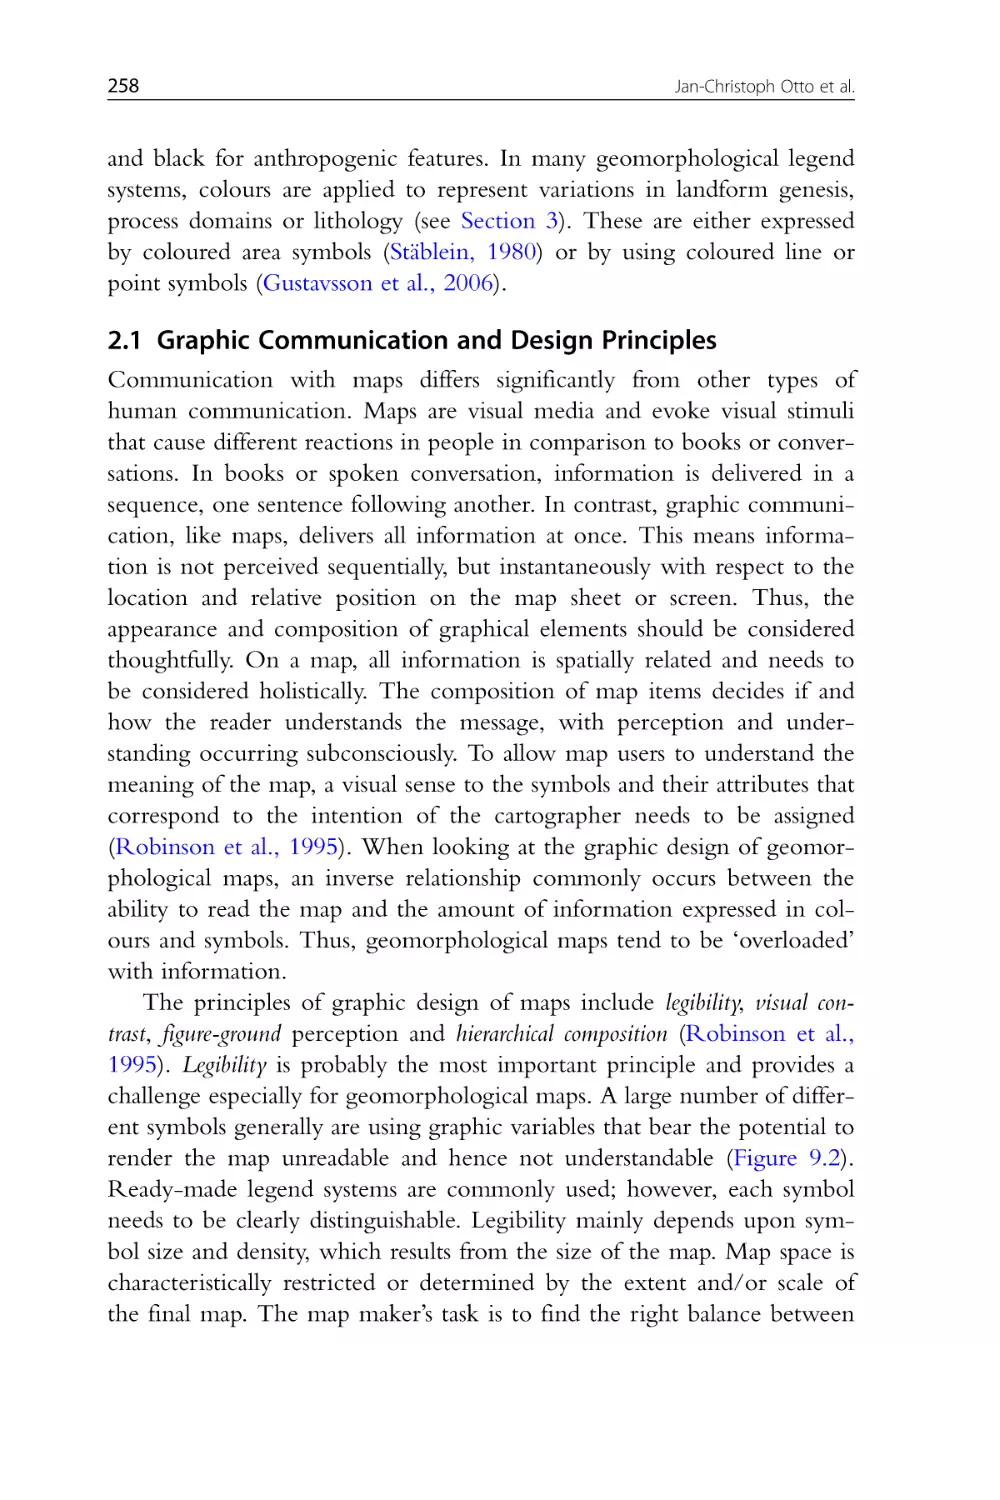 2.1 Graphic Communication and Design Principles